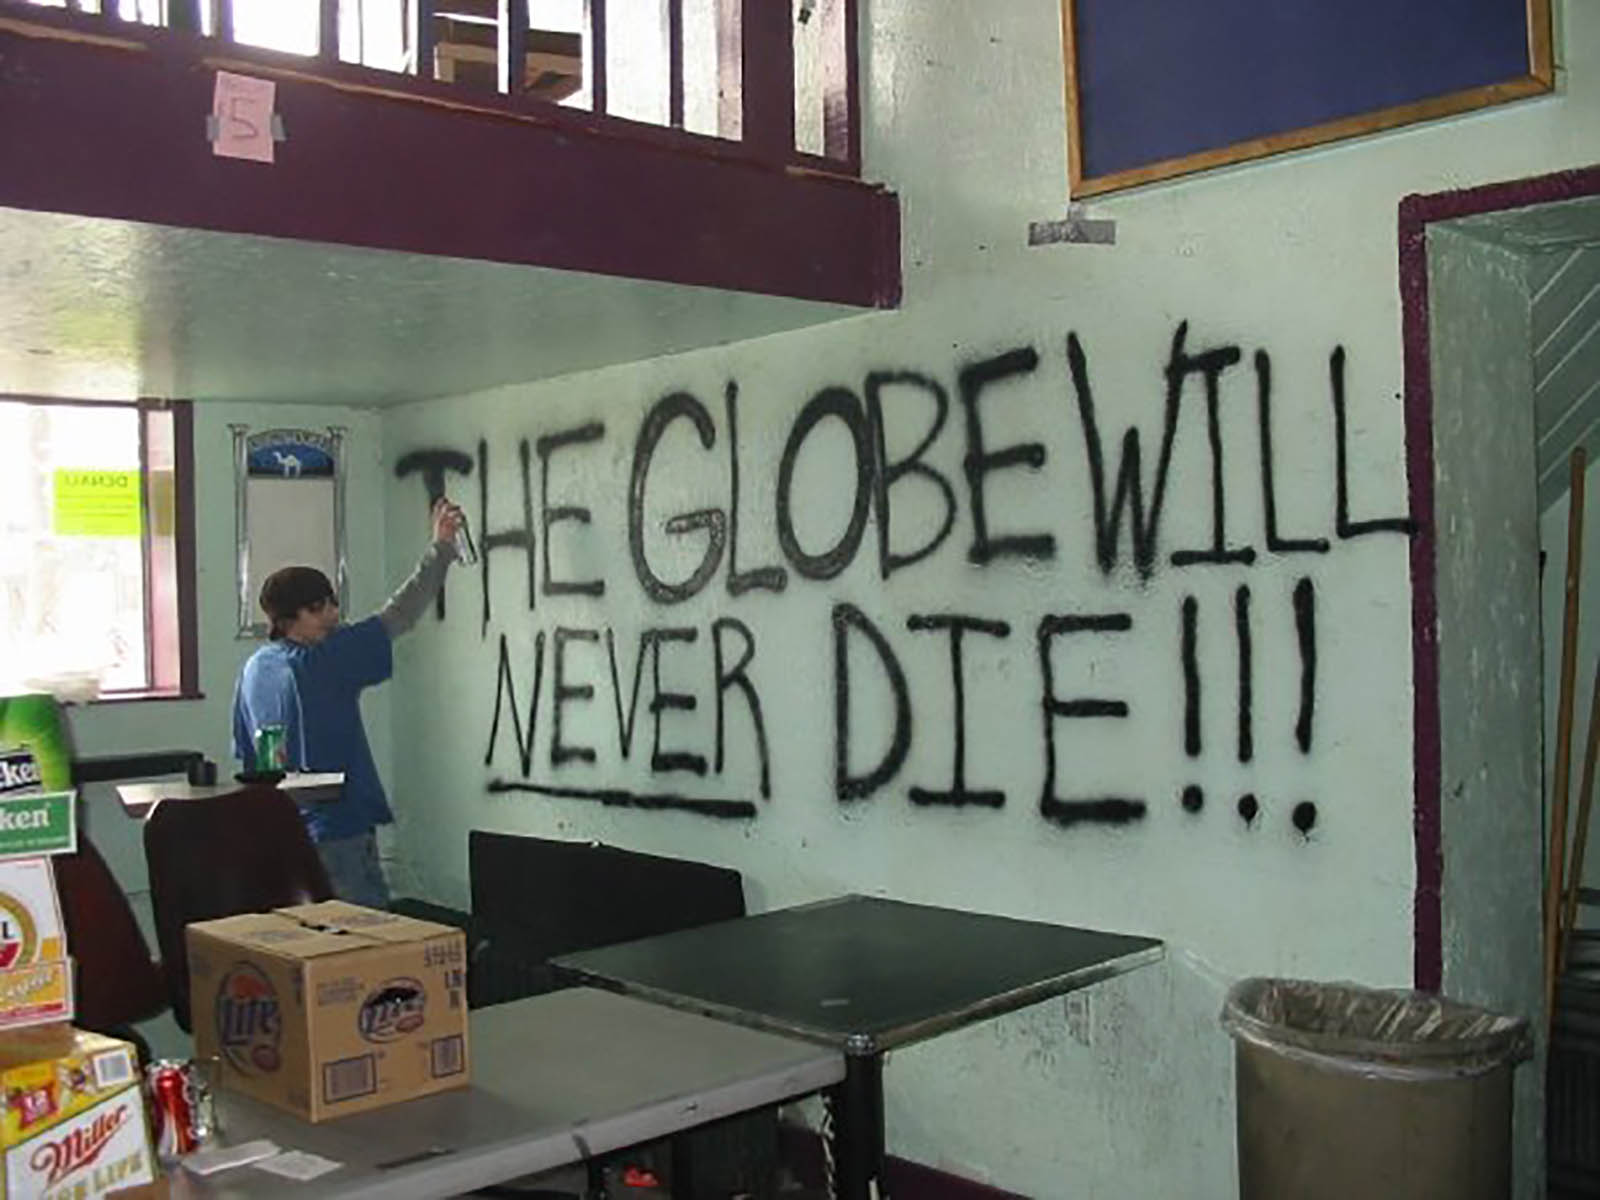 The Globe will never die!!!